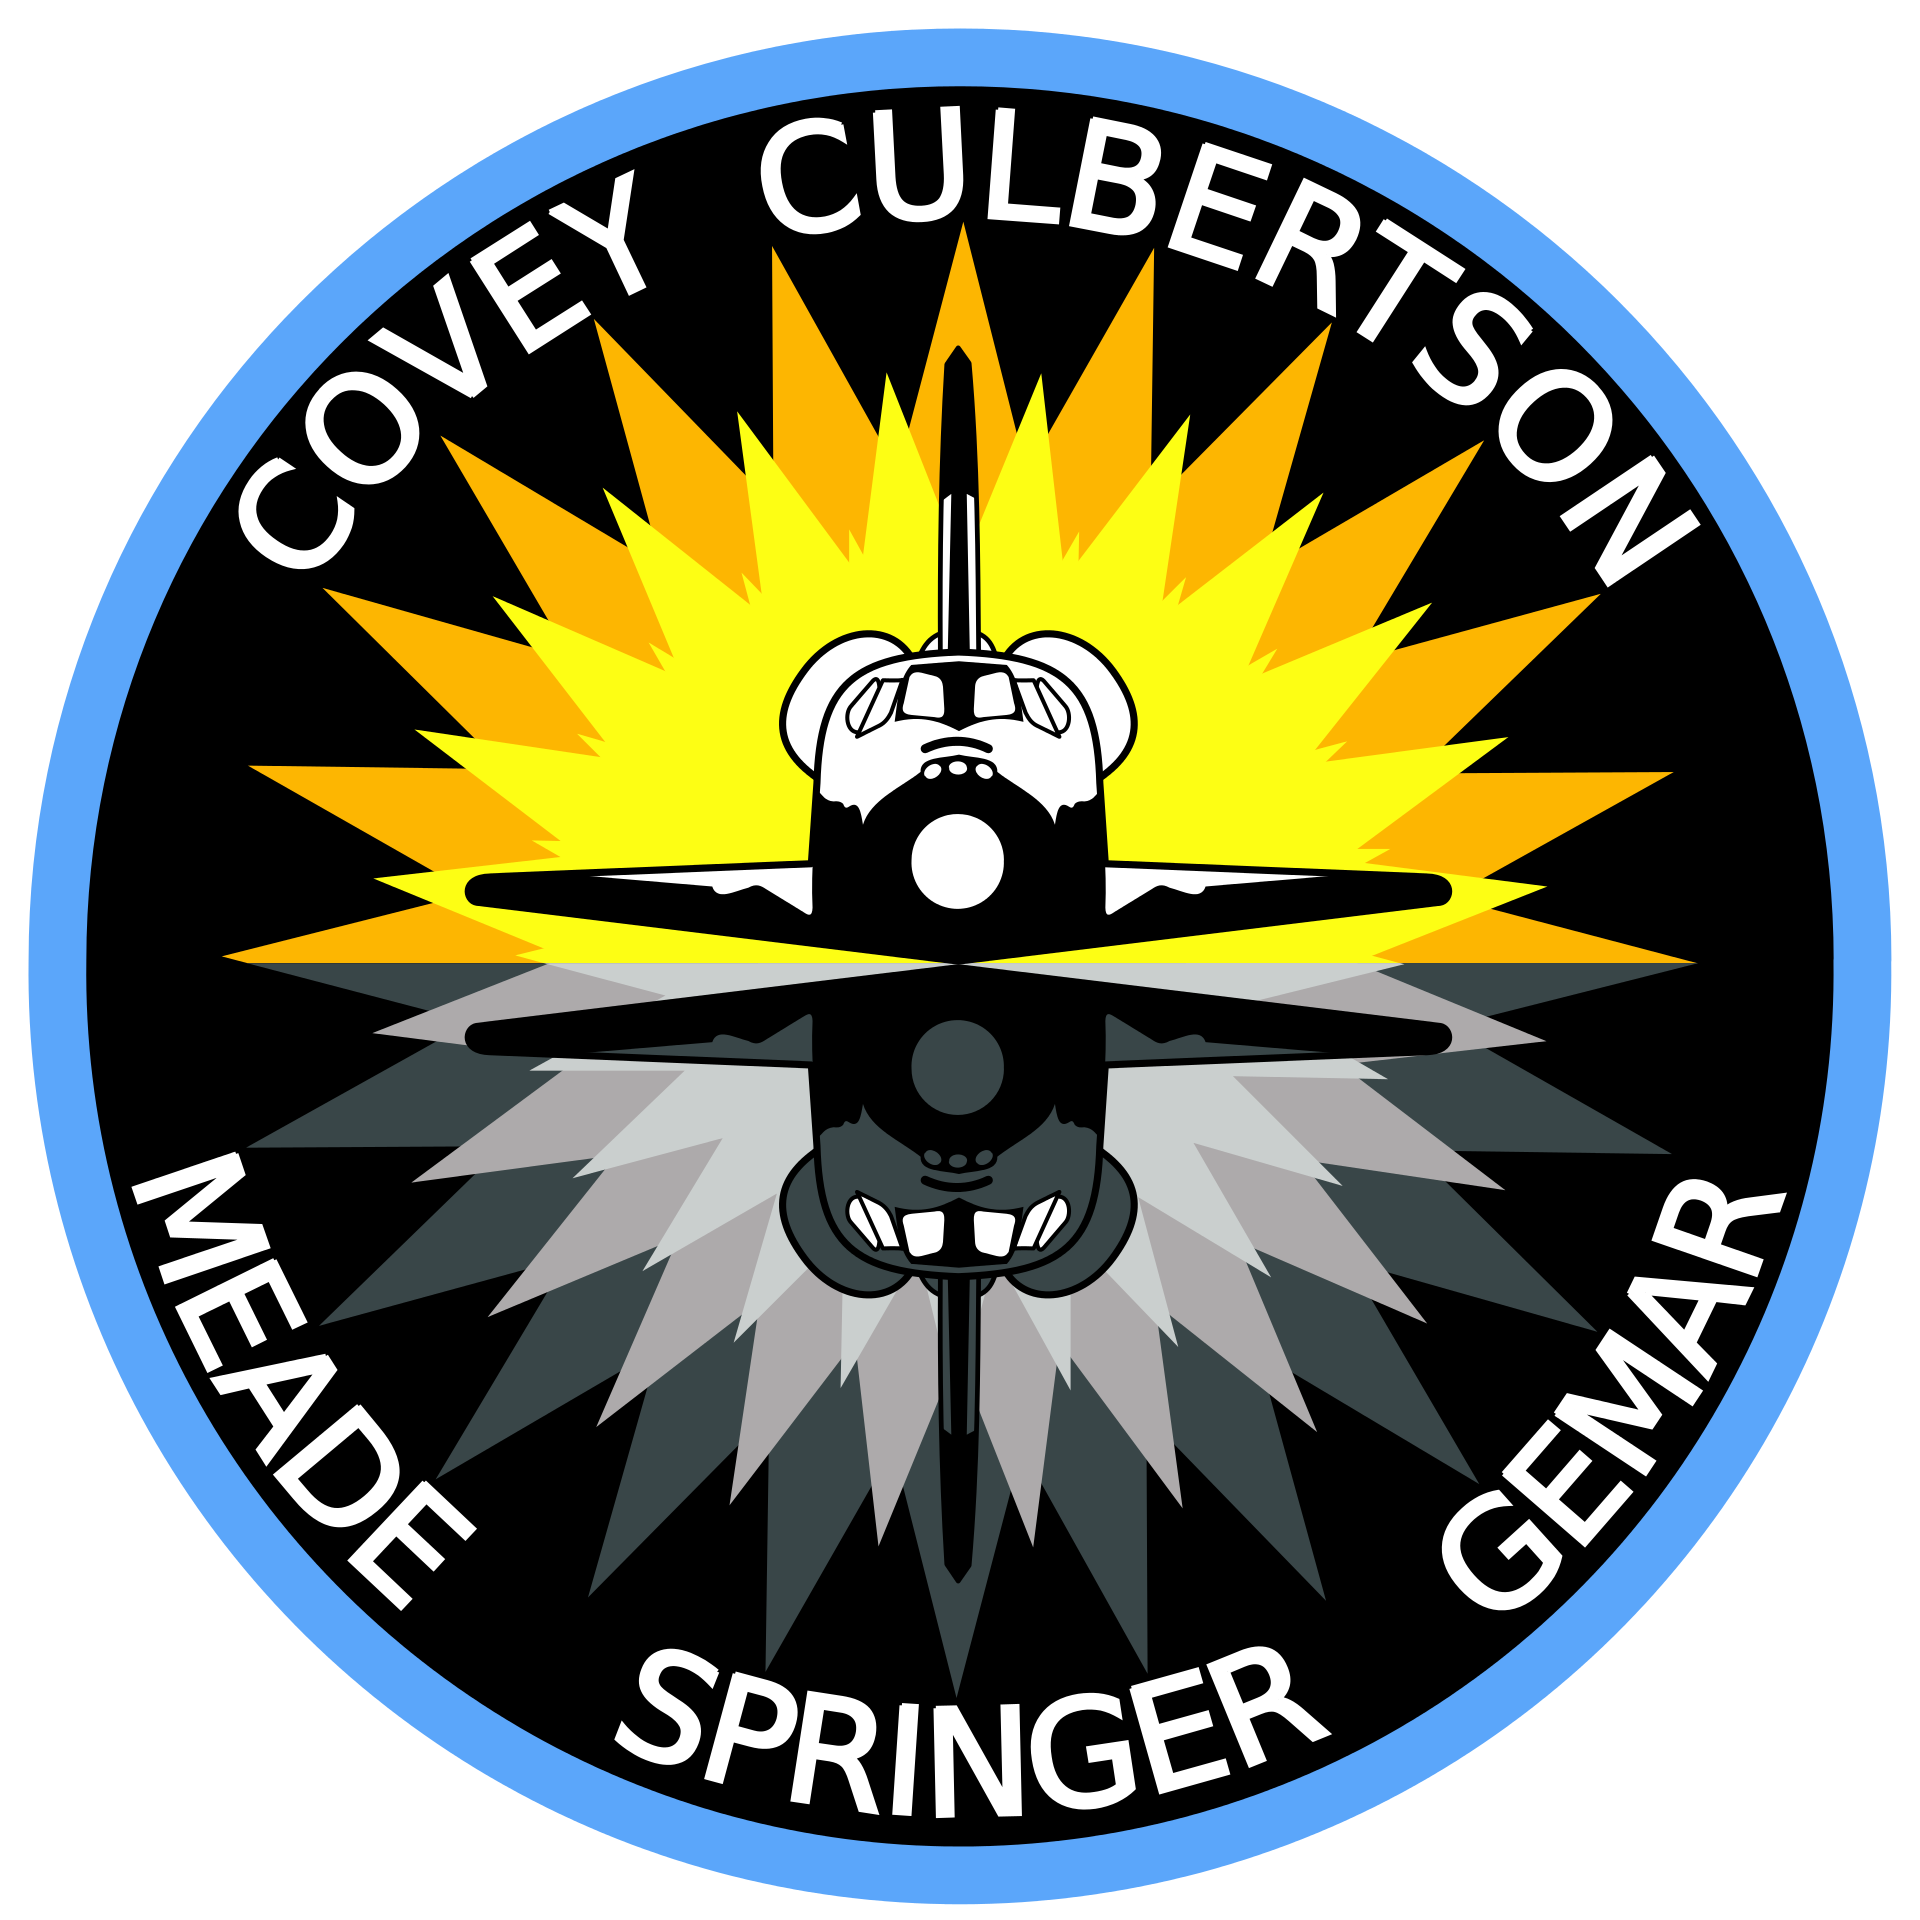 Mission patch for STS-38